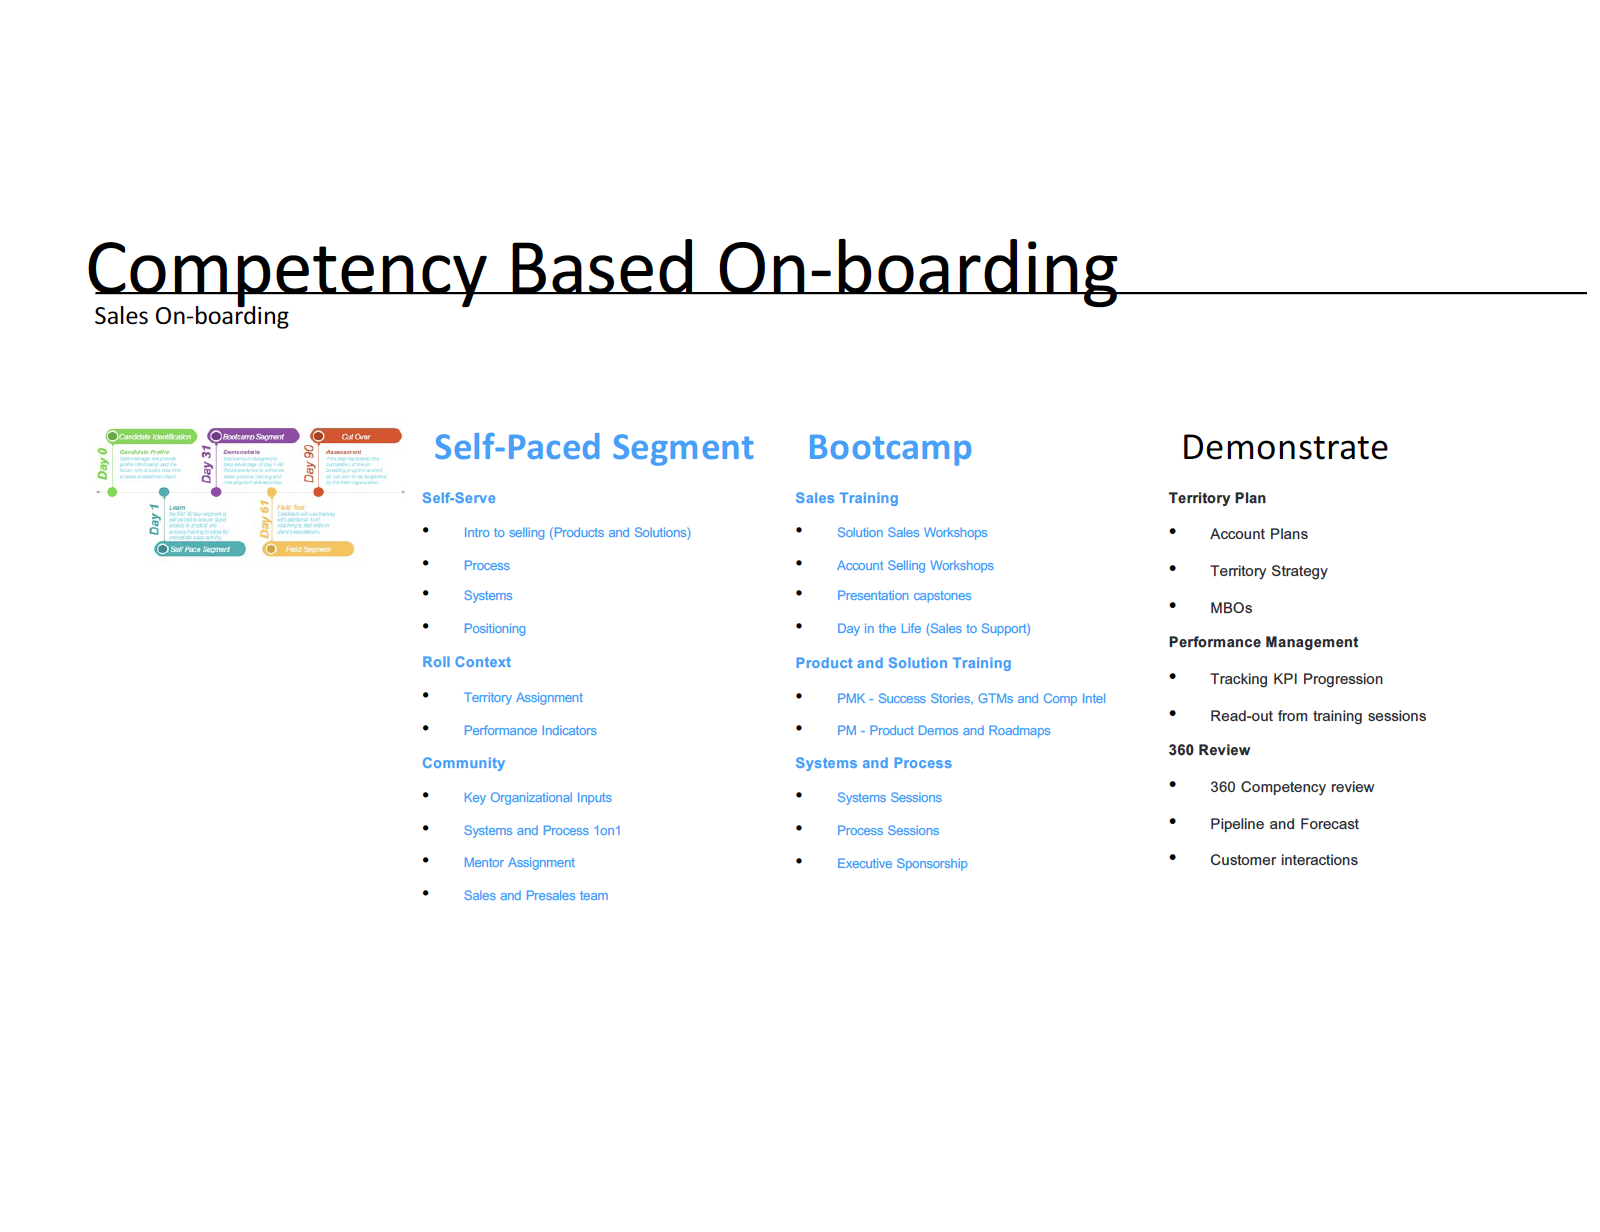 Competency-based onboarding